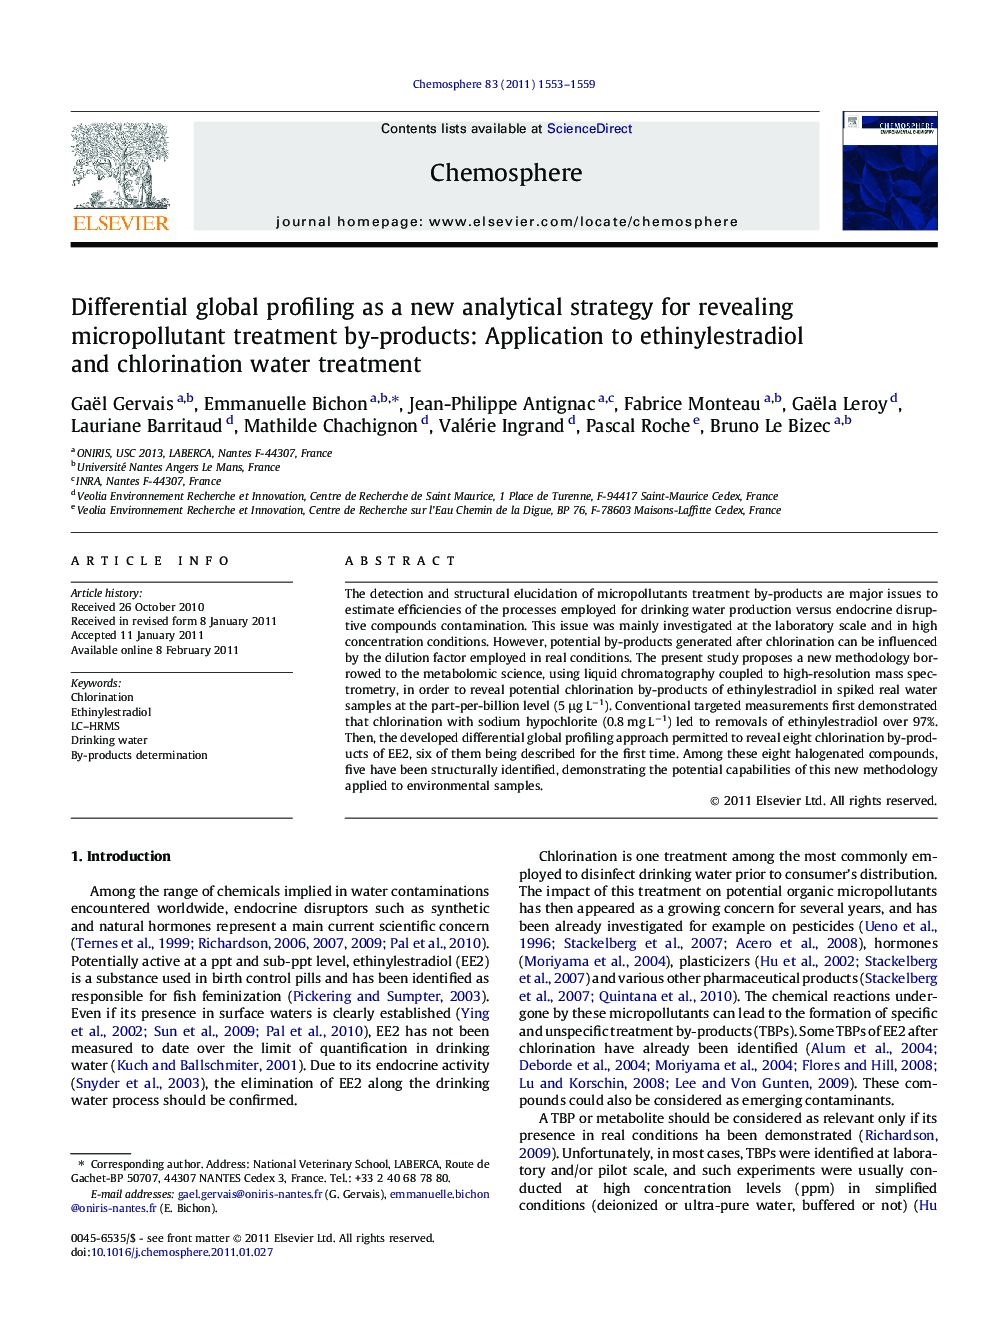 Differential global profiling as a new analytical strategy for revealing micropollutant treatment by-products: Application to ethinylestradiol and chlorination water treatment